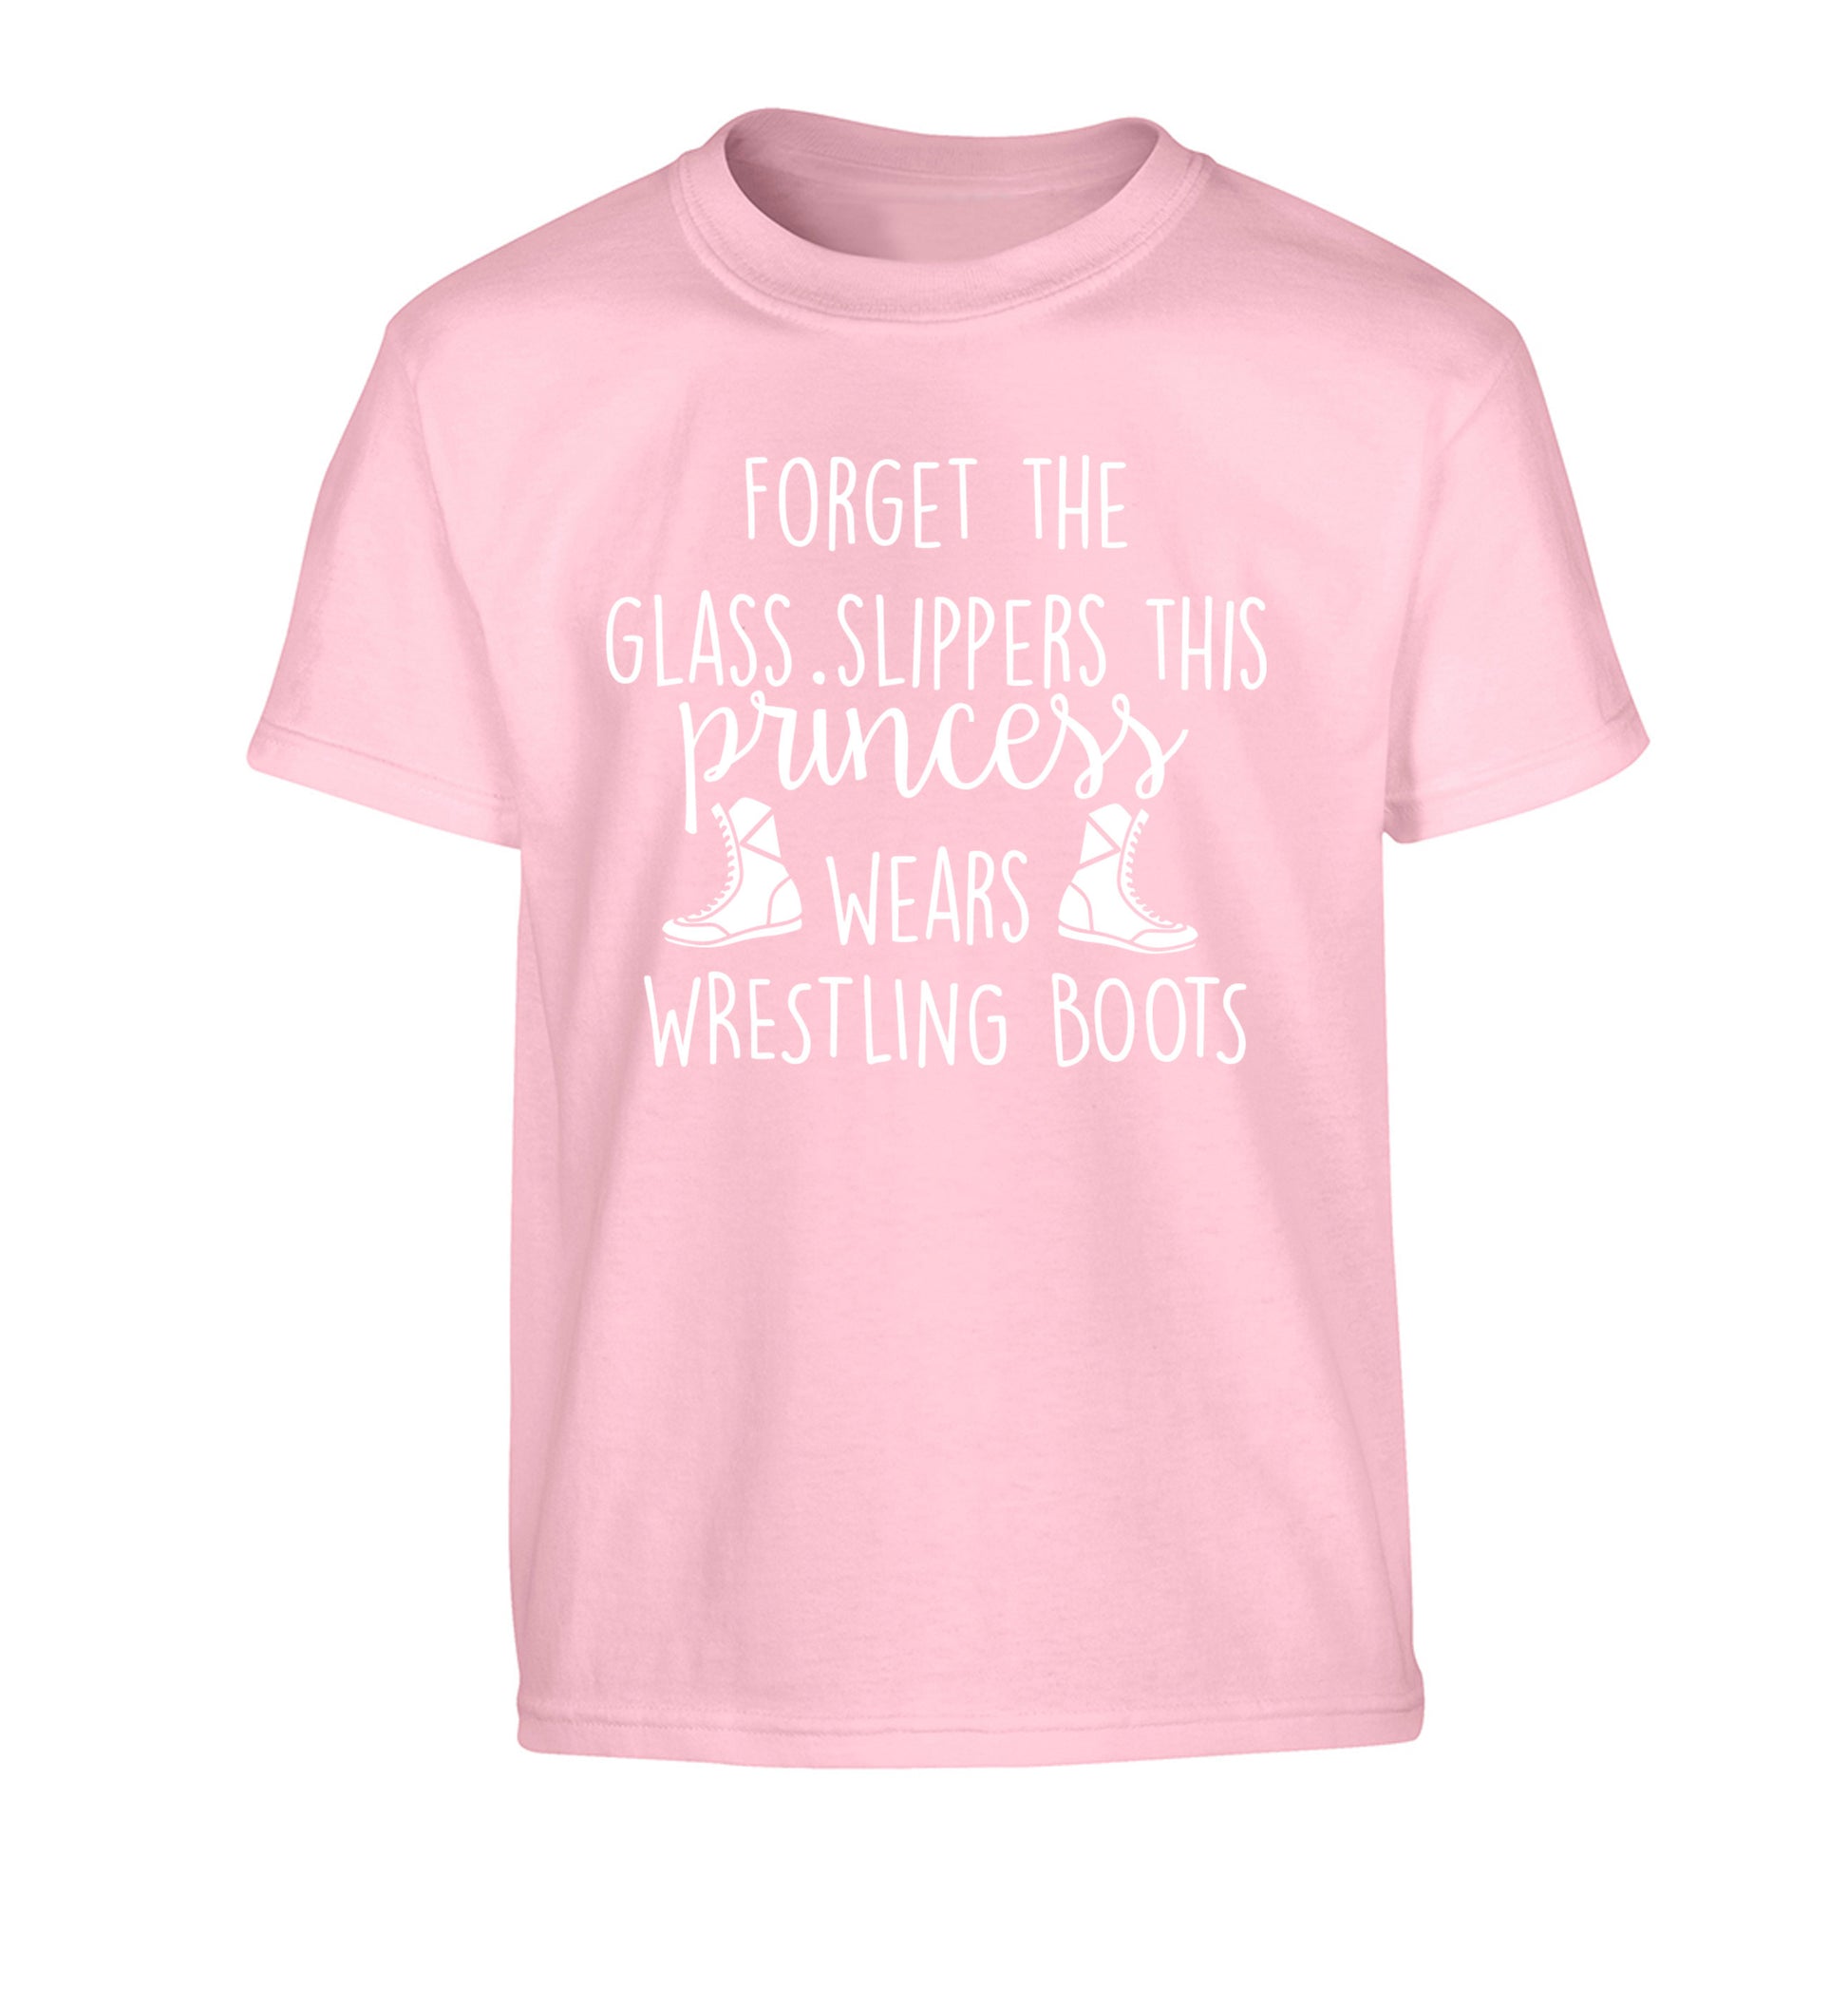 Forget the glass slippers this princess wears wrestling boots Children's light pink Tshirt 12-14 Years